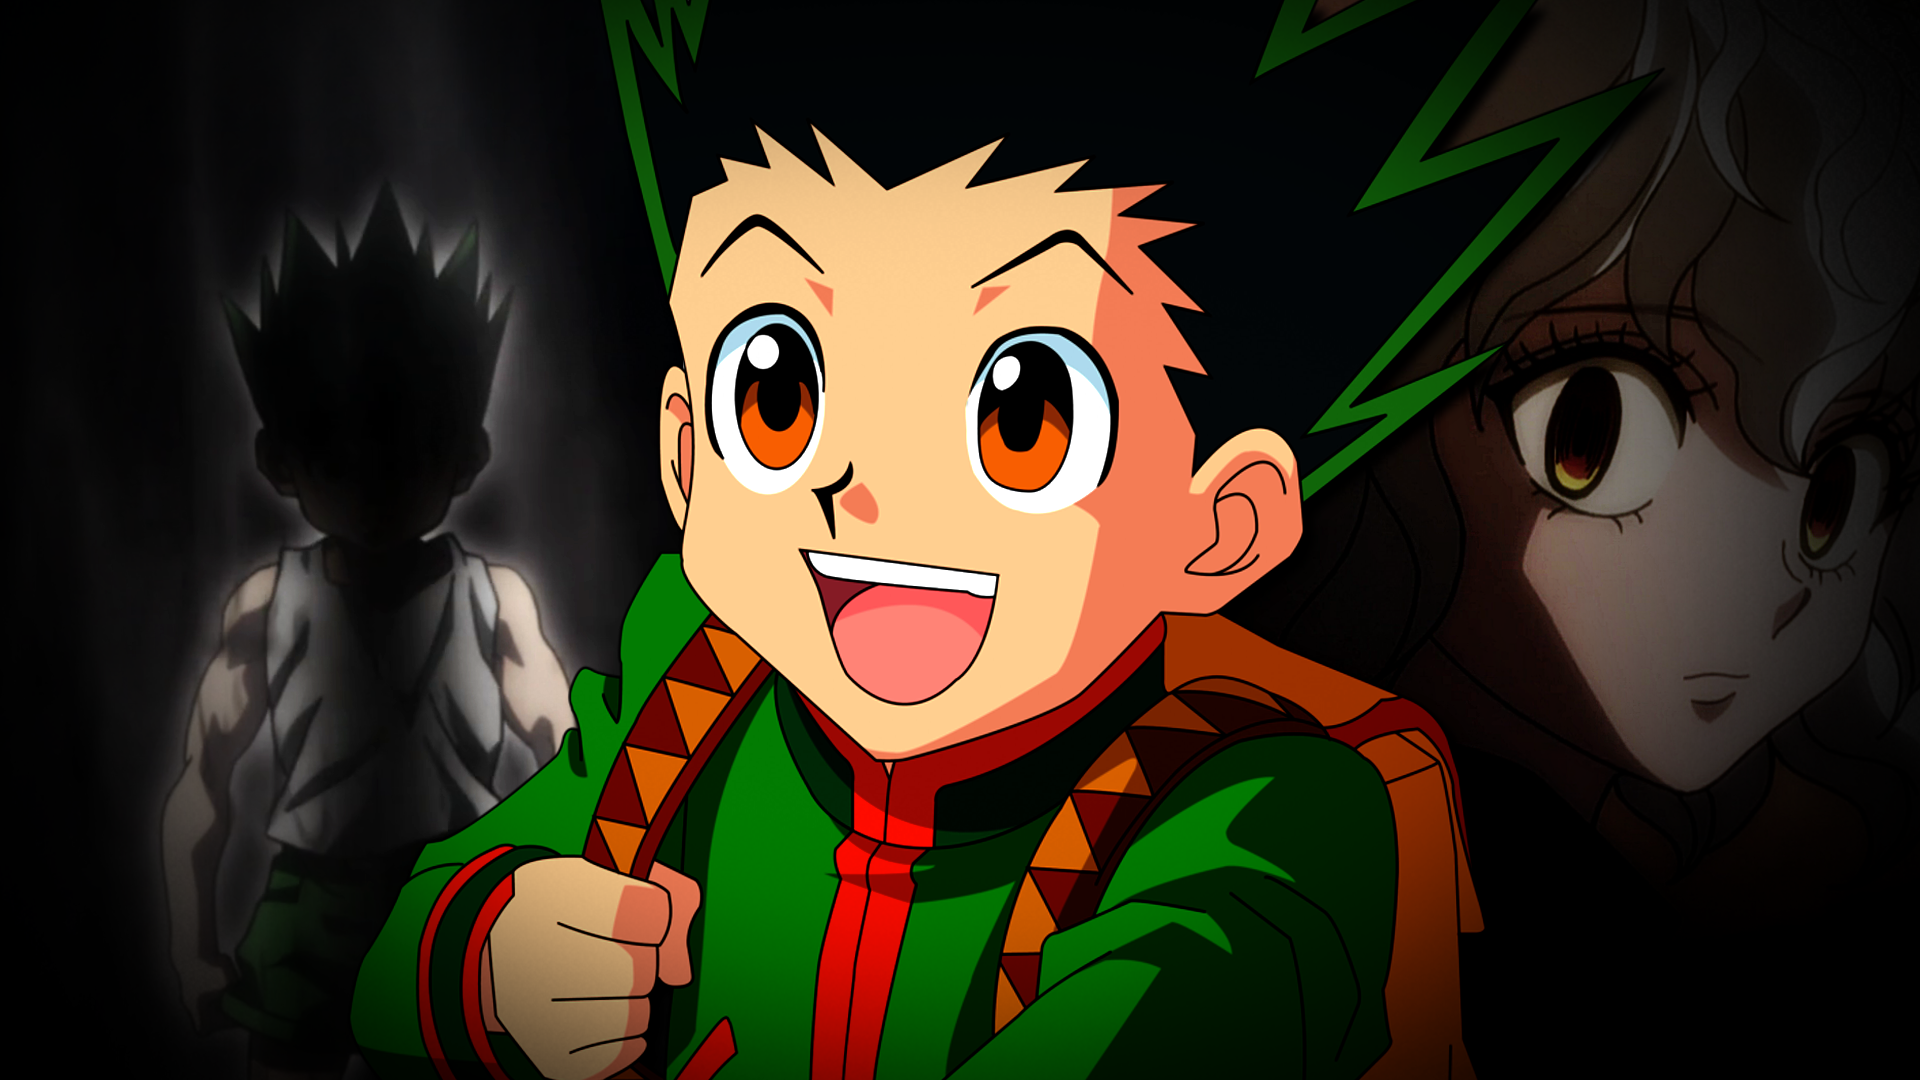 gon wallpaper,cartoon,anime,fictional character,animation,style